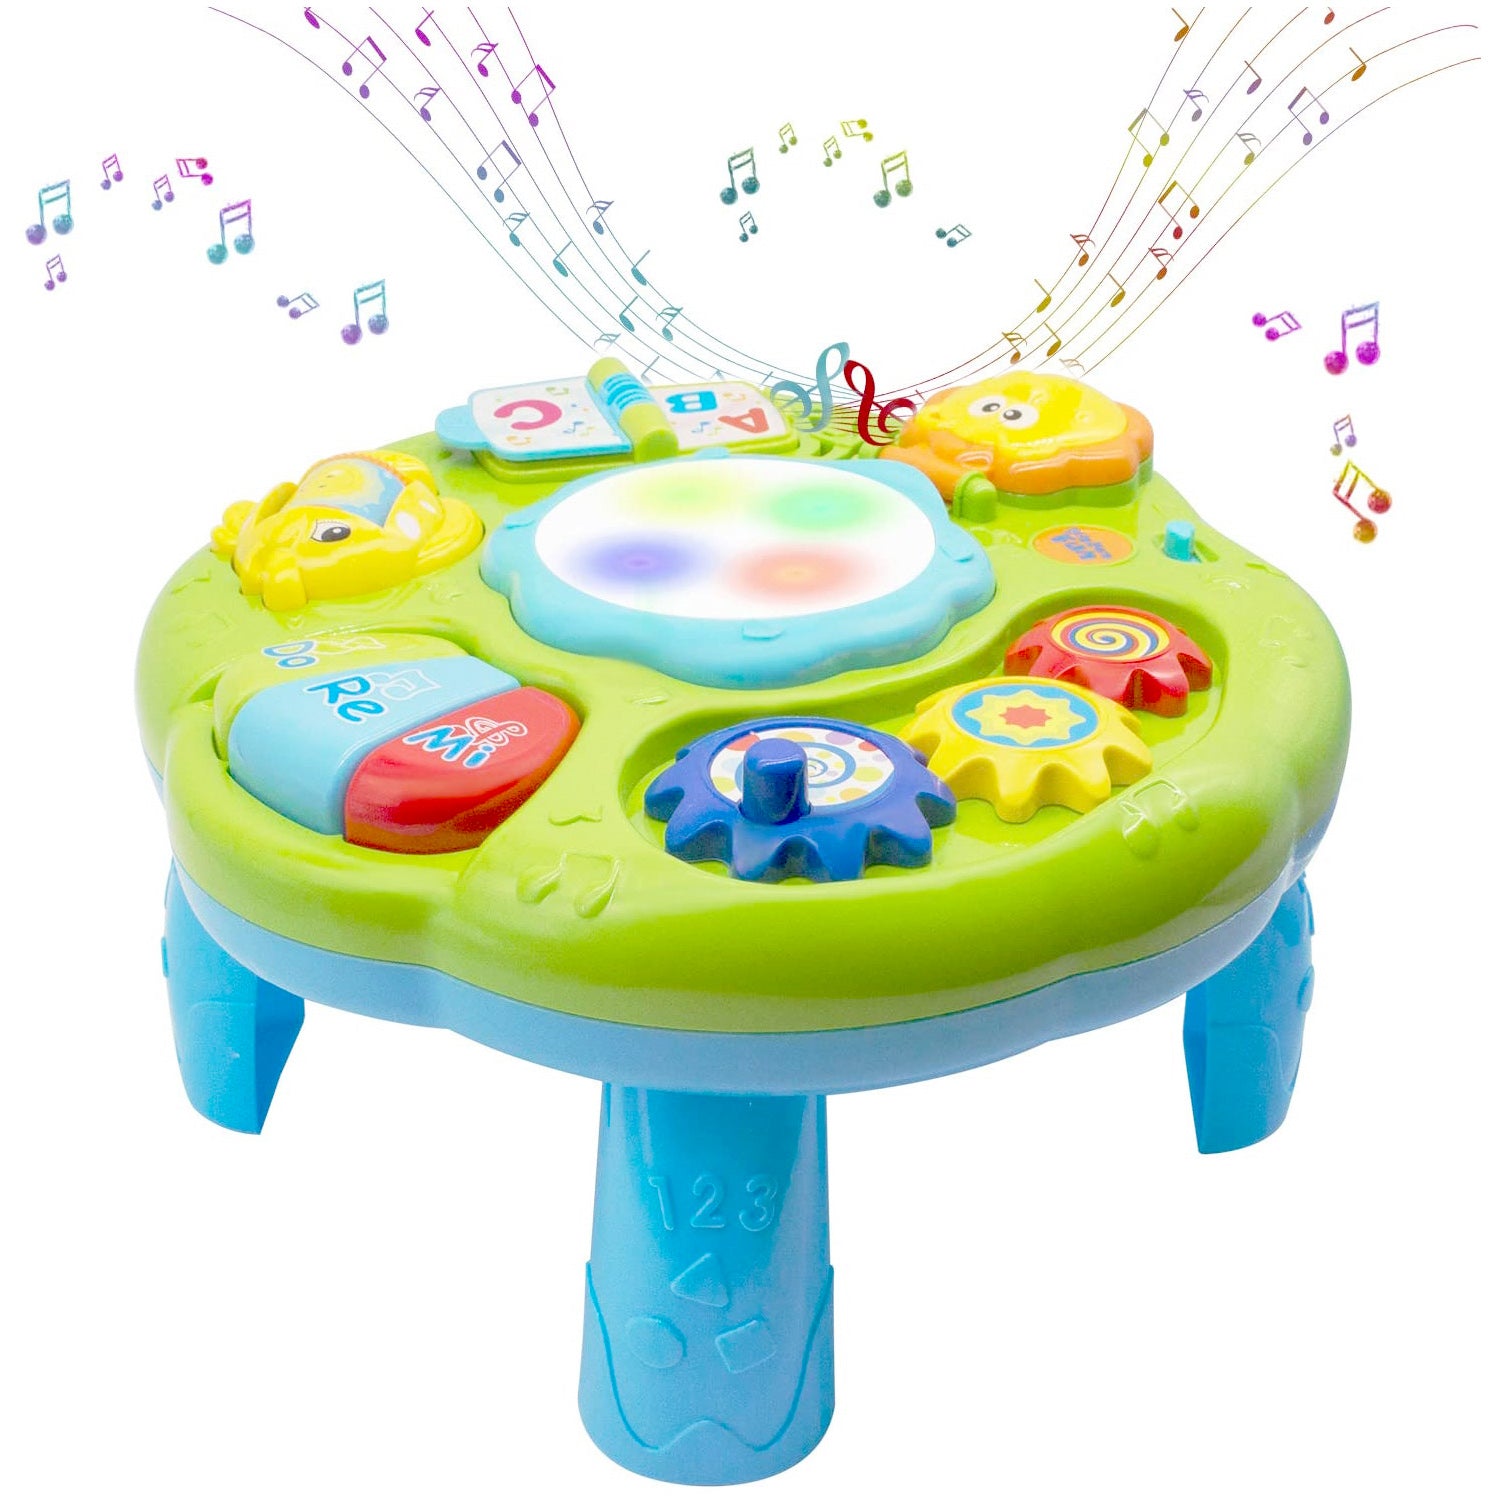  Baby Toys Musical Learning Table 12x12x7inch Music